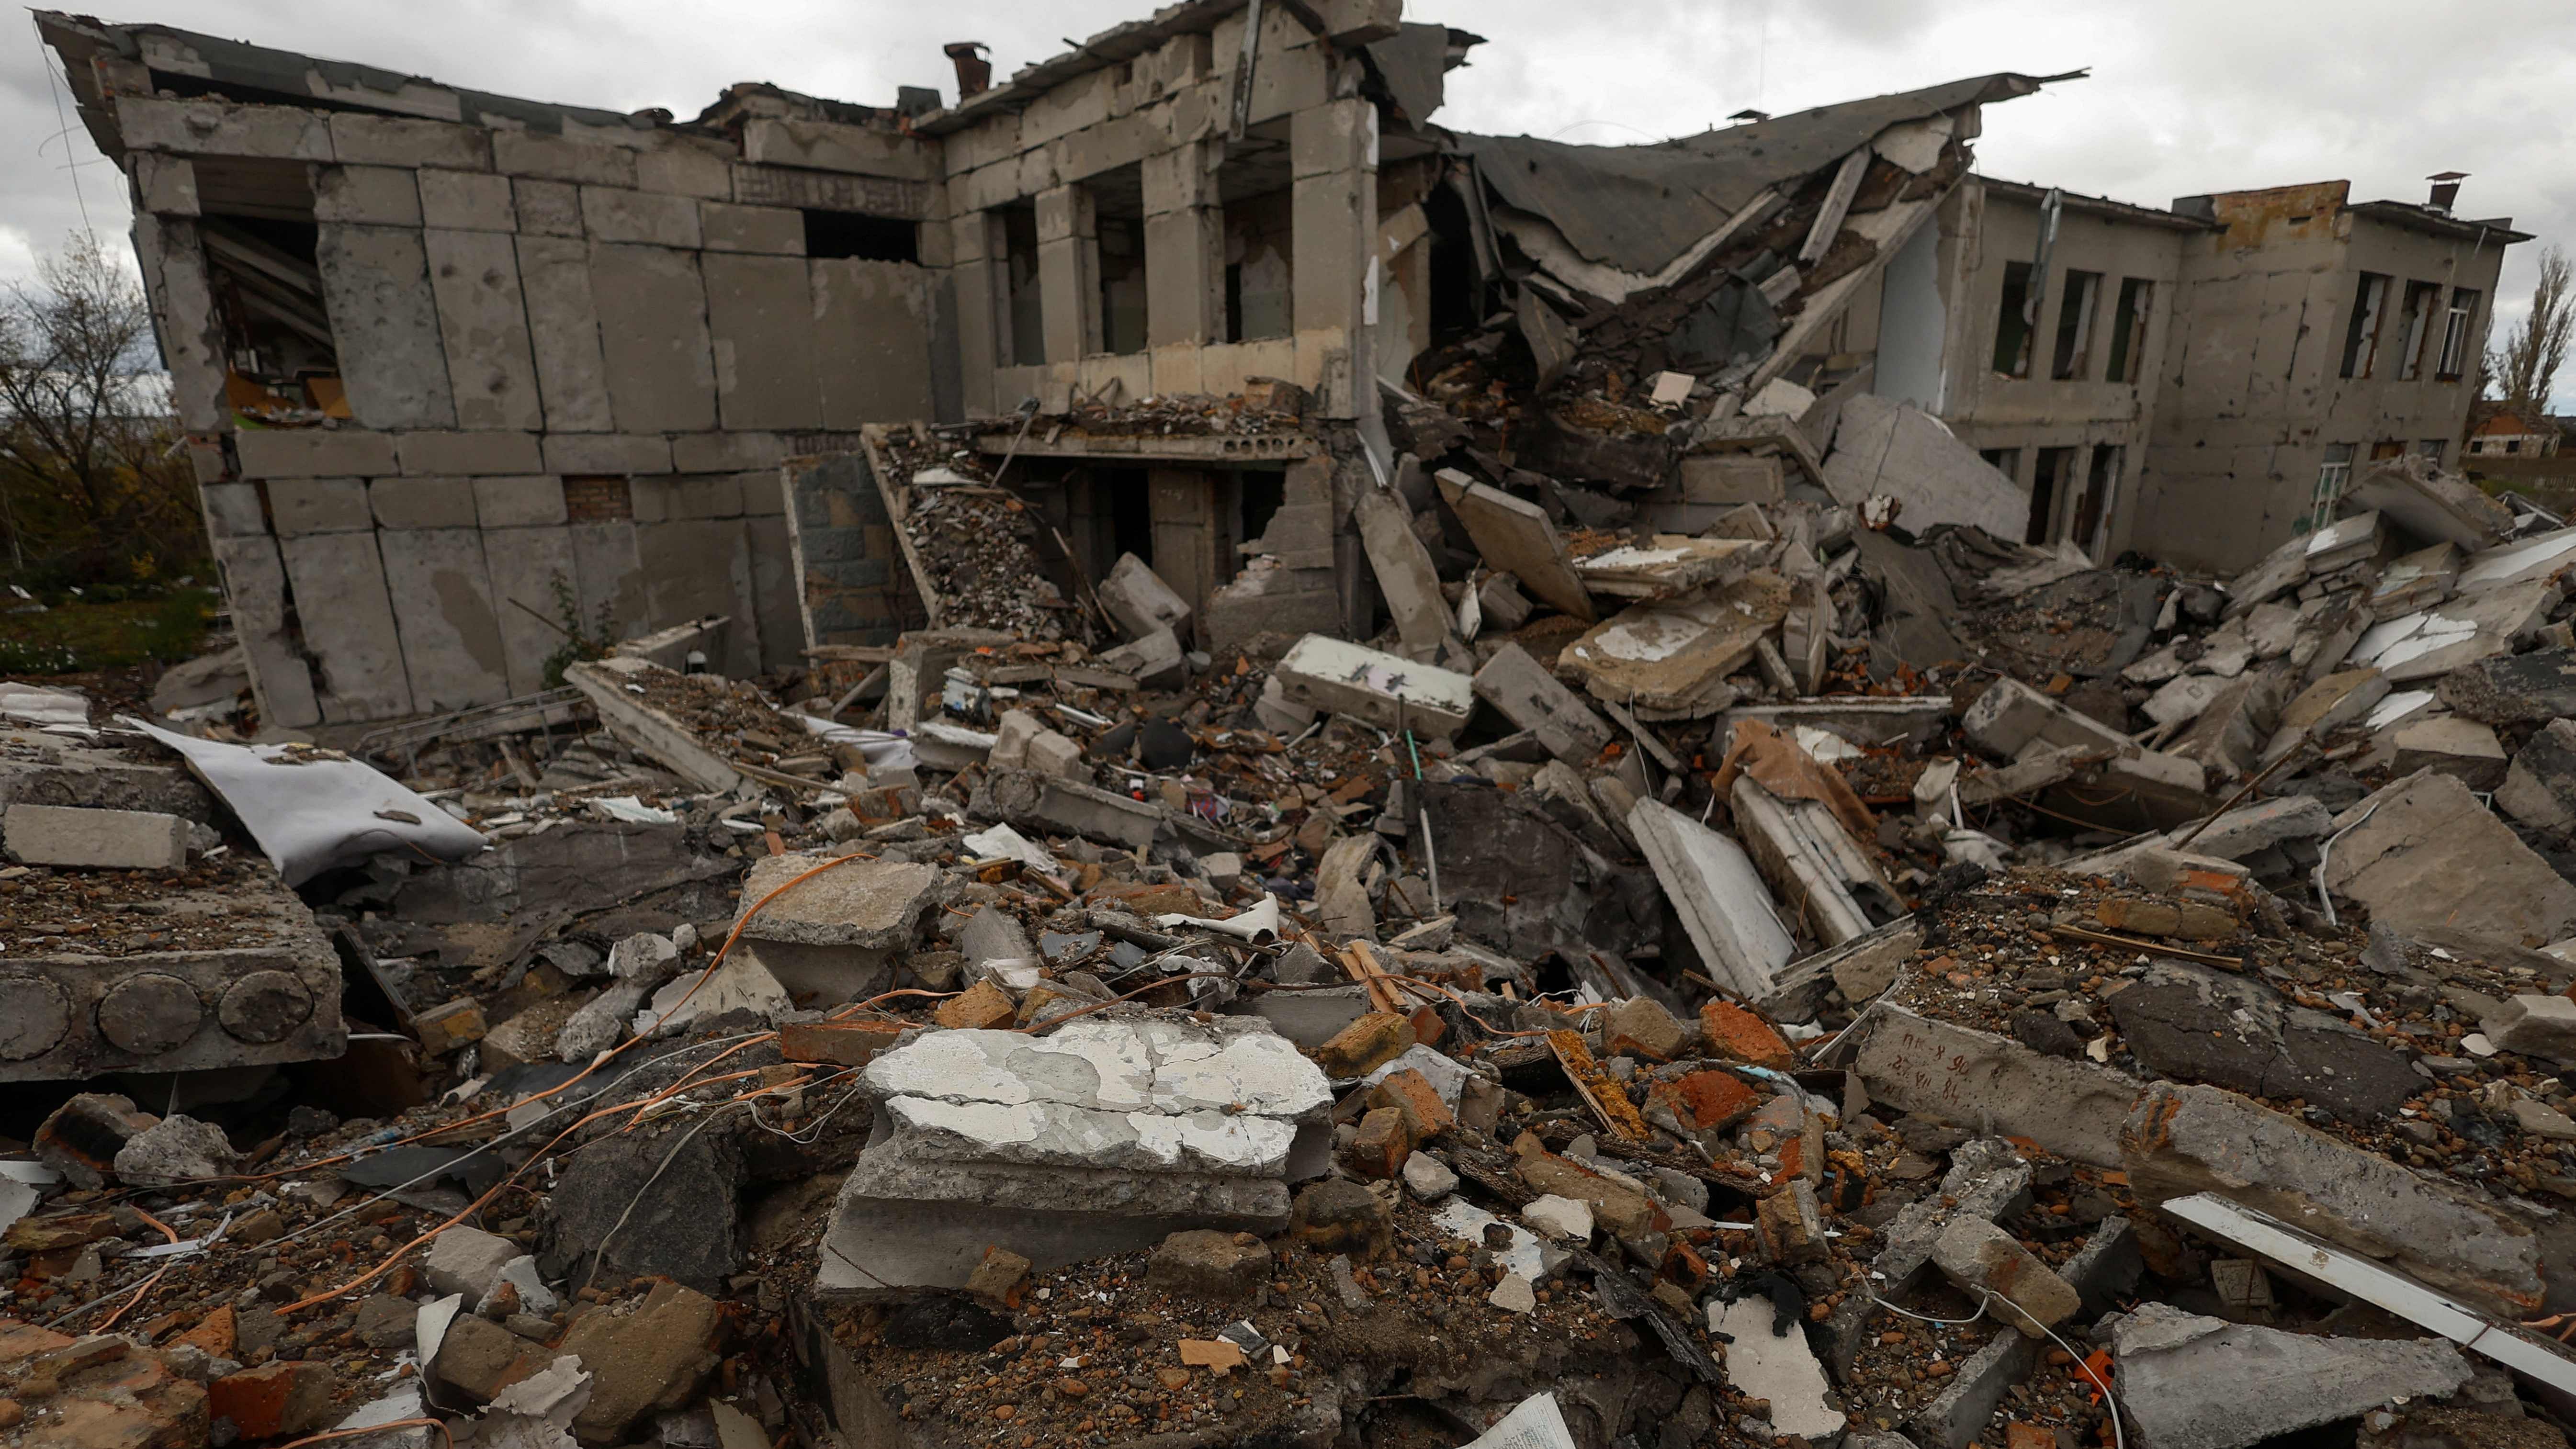 A school building destroyed by a Russian air strike in a village in Mykolaiv region, Ukraine. Credit: Reuters Photo